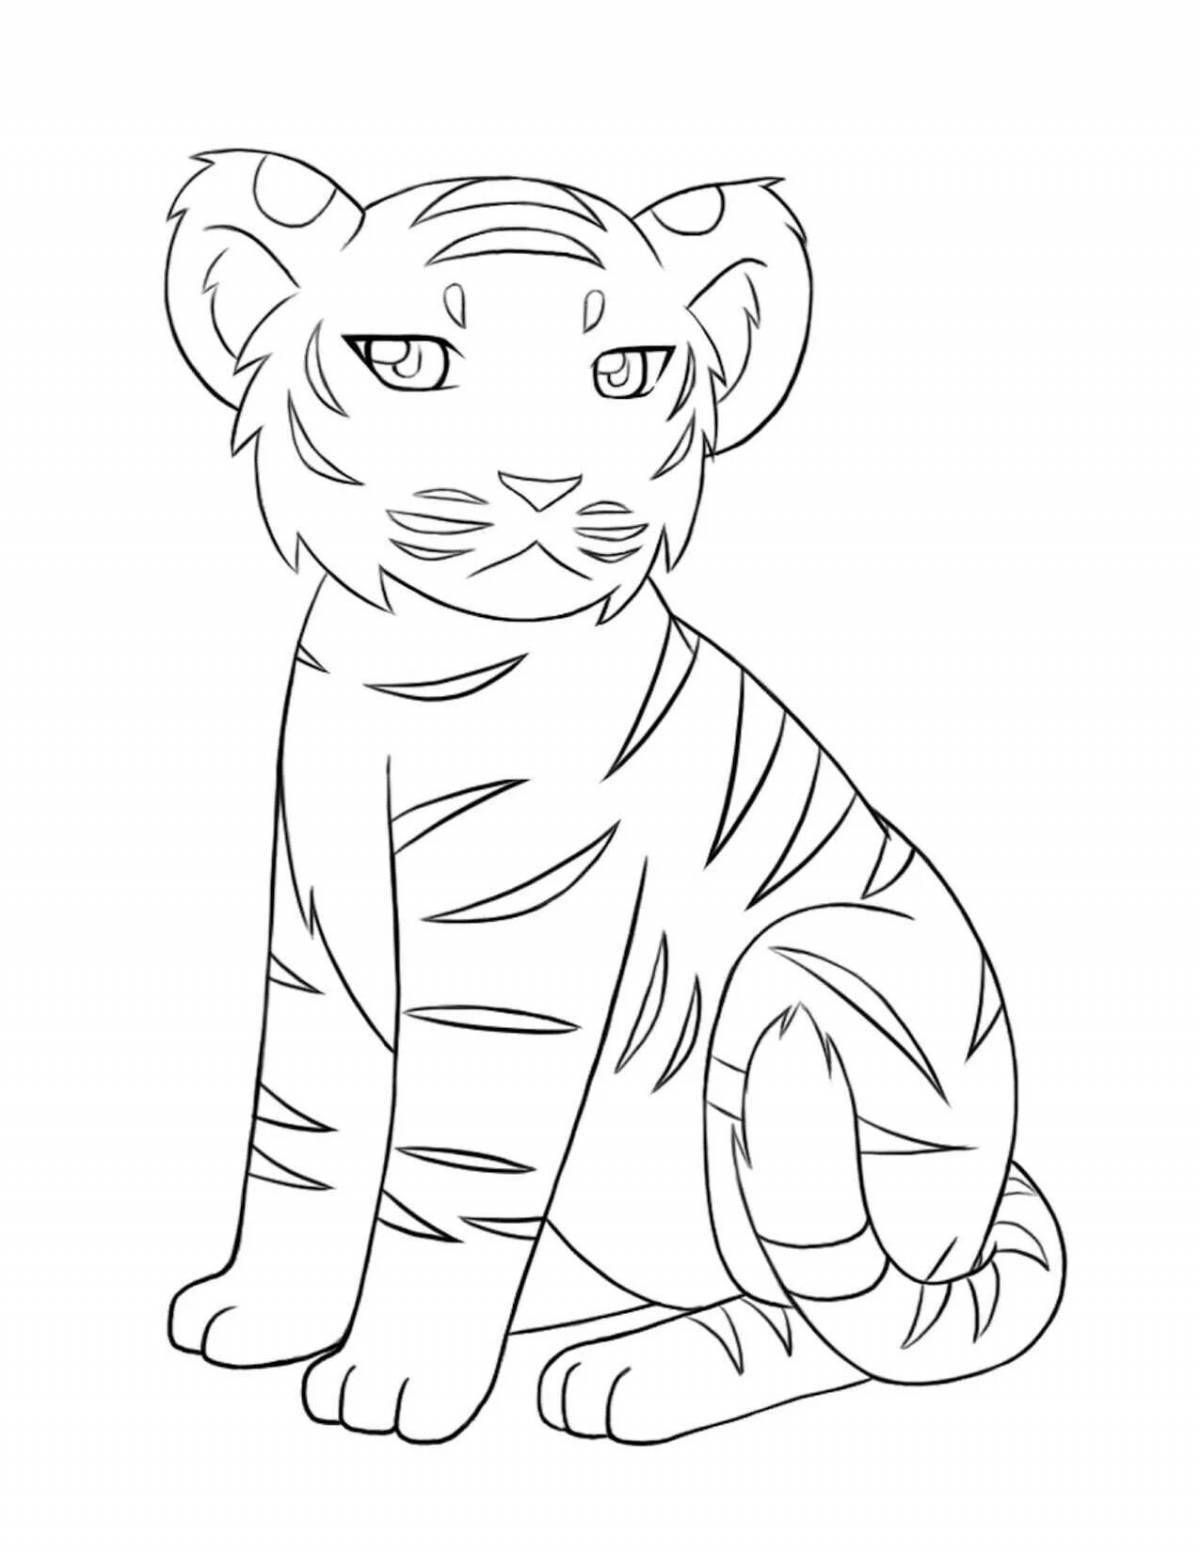 Curious tiger cub coloring page